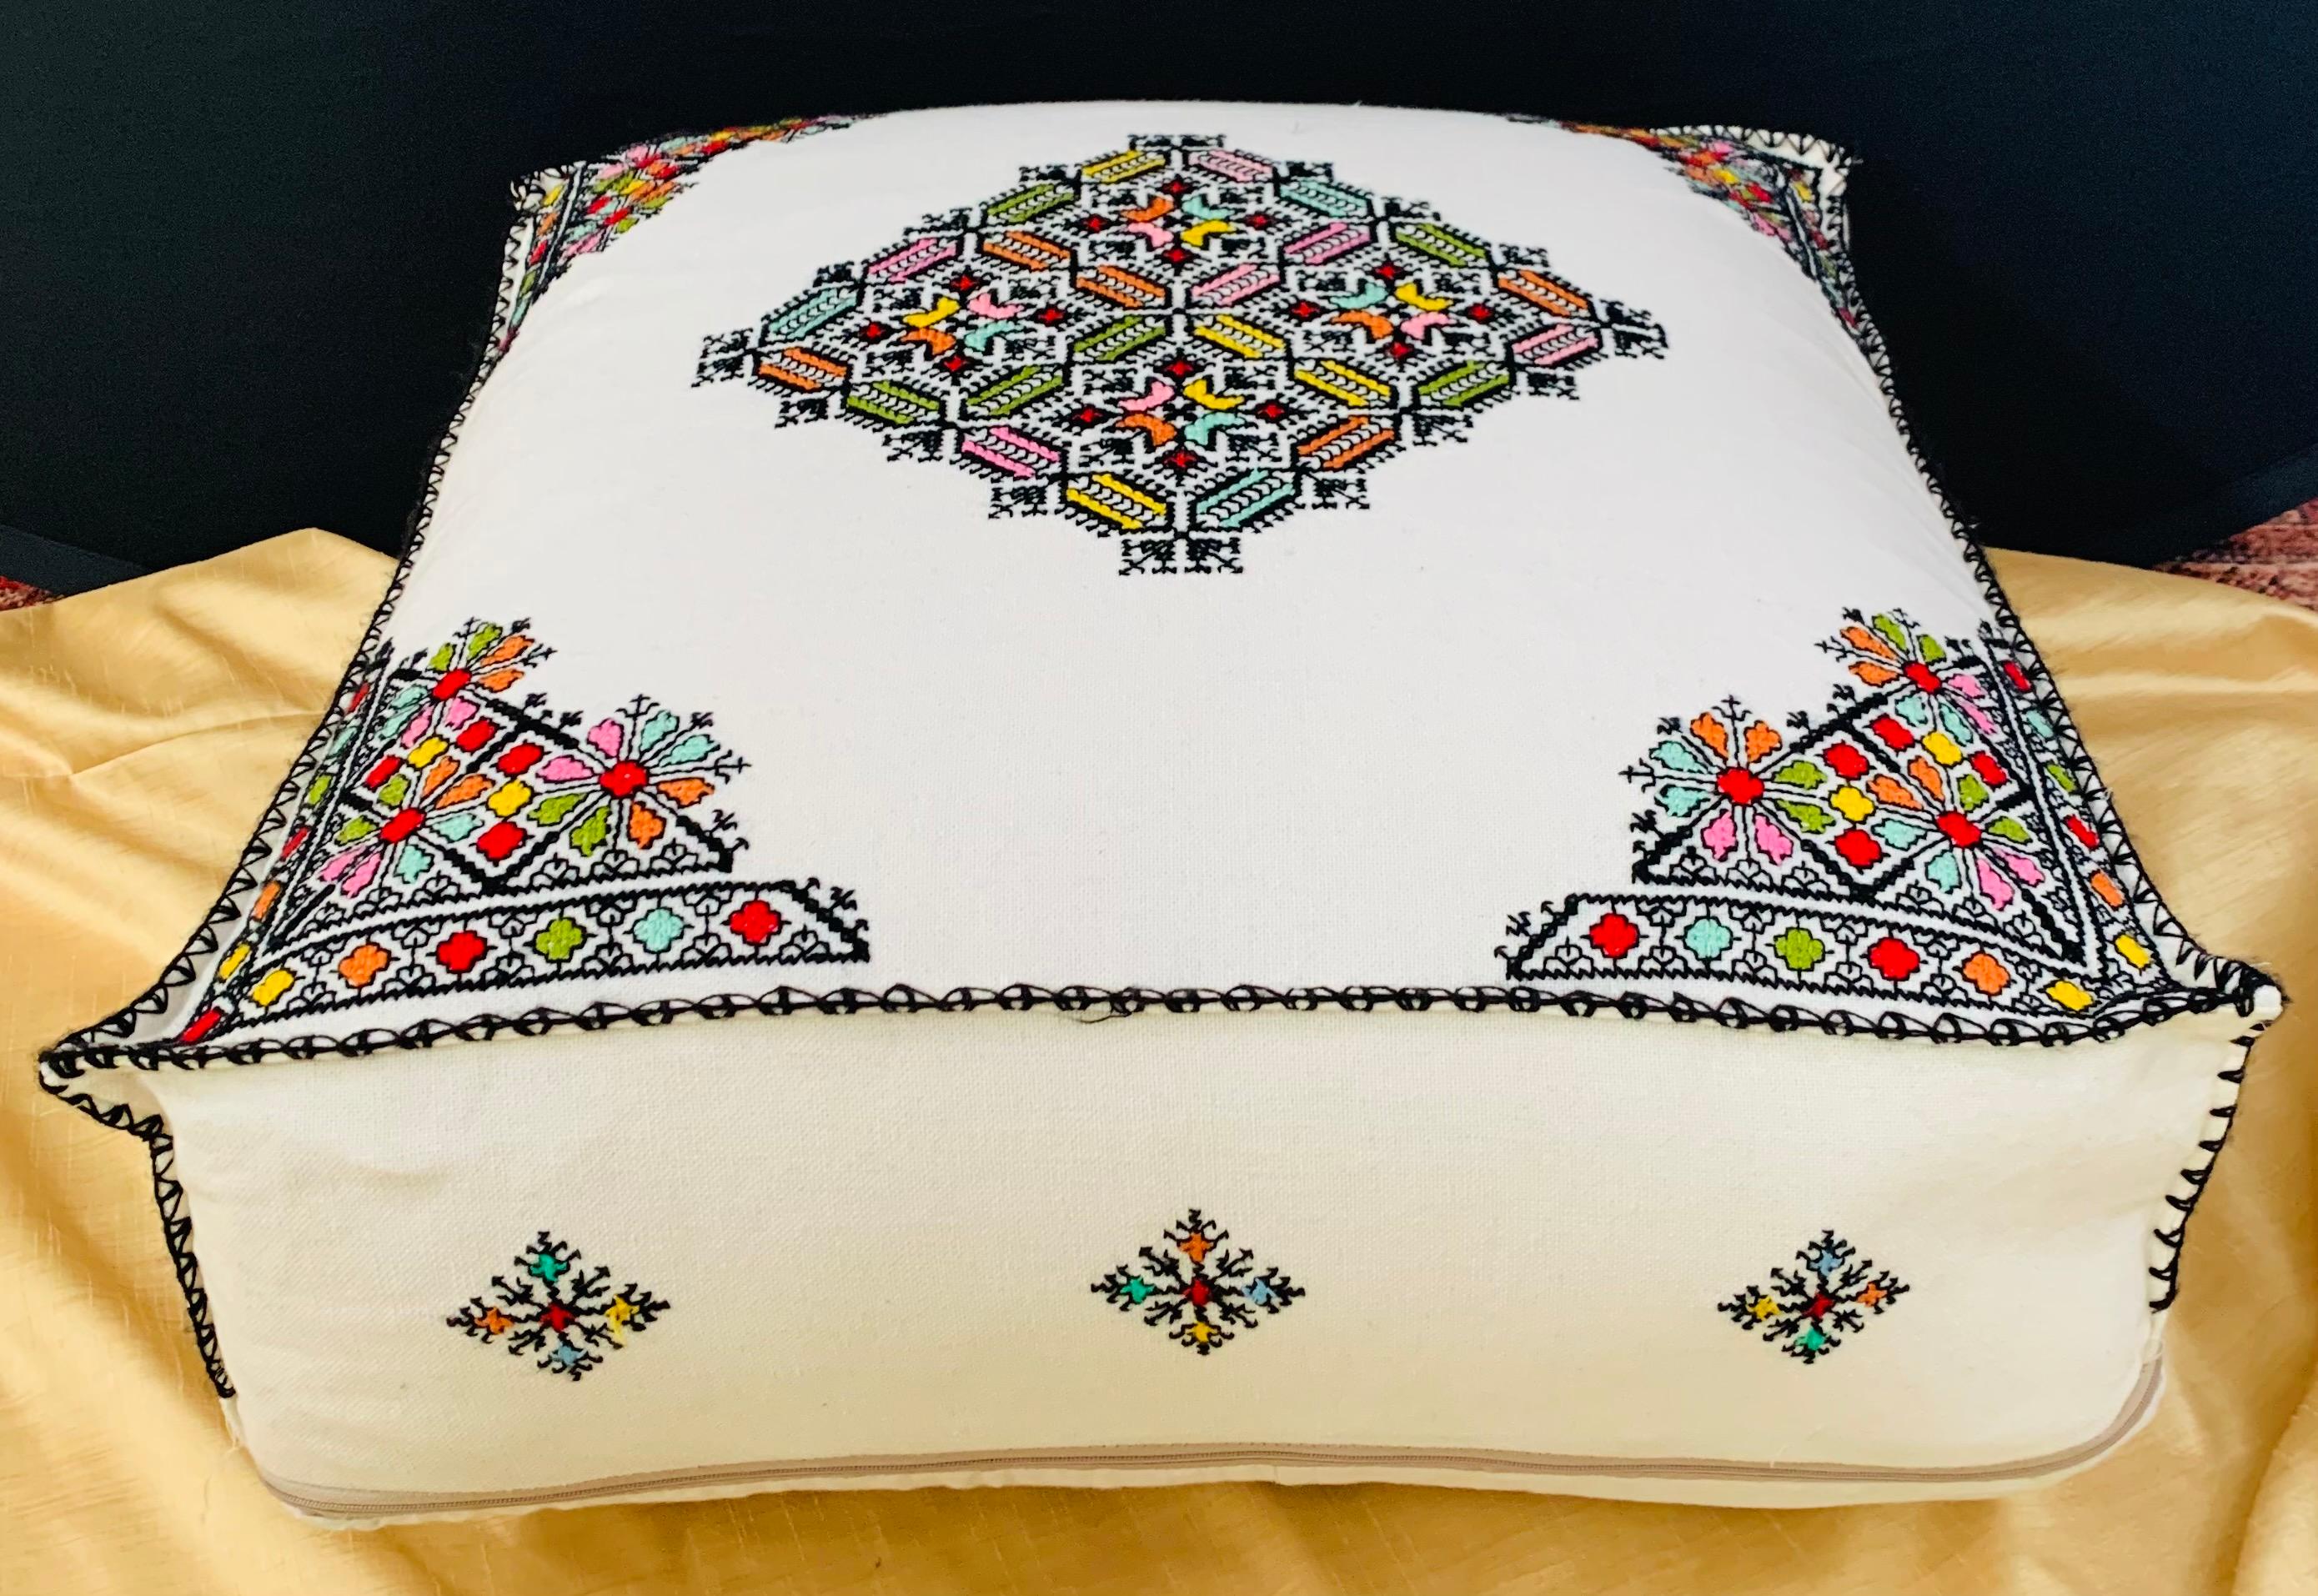 A large handwoven Moroccan white ottoman, cushion or pouf in a square shape. This eye-catching ottoman or pouf will lend an air of exotic majesty to your den or living room. Handcrafted by master artisans in the city of Fes and featuring an ornate